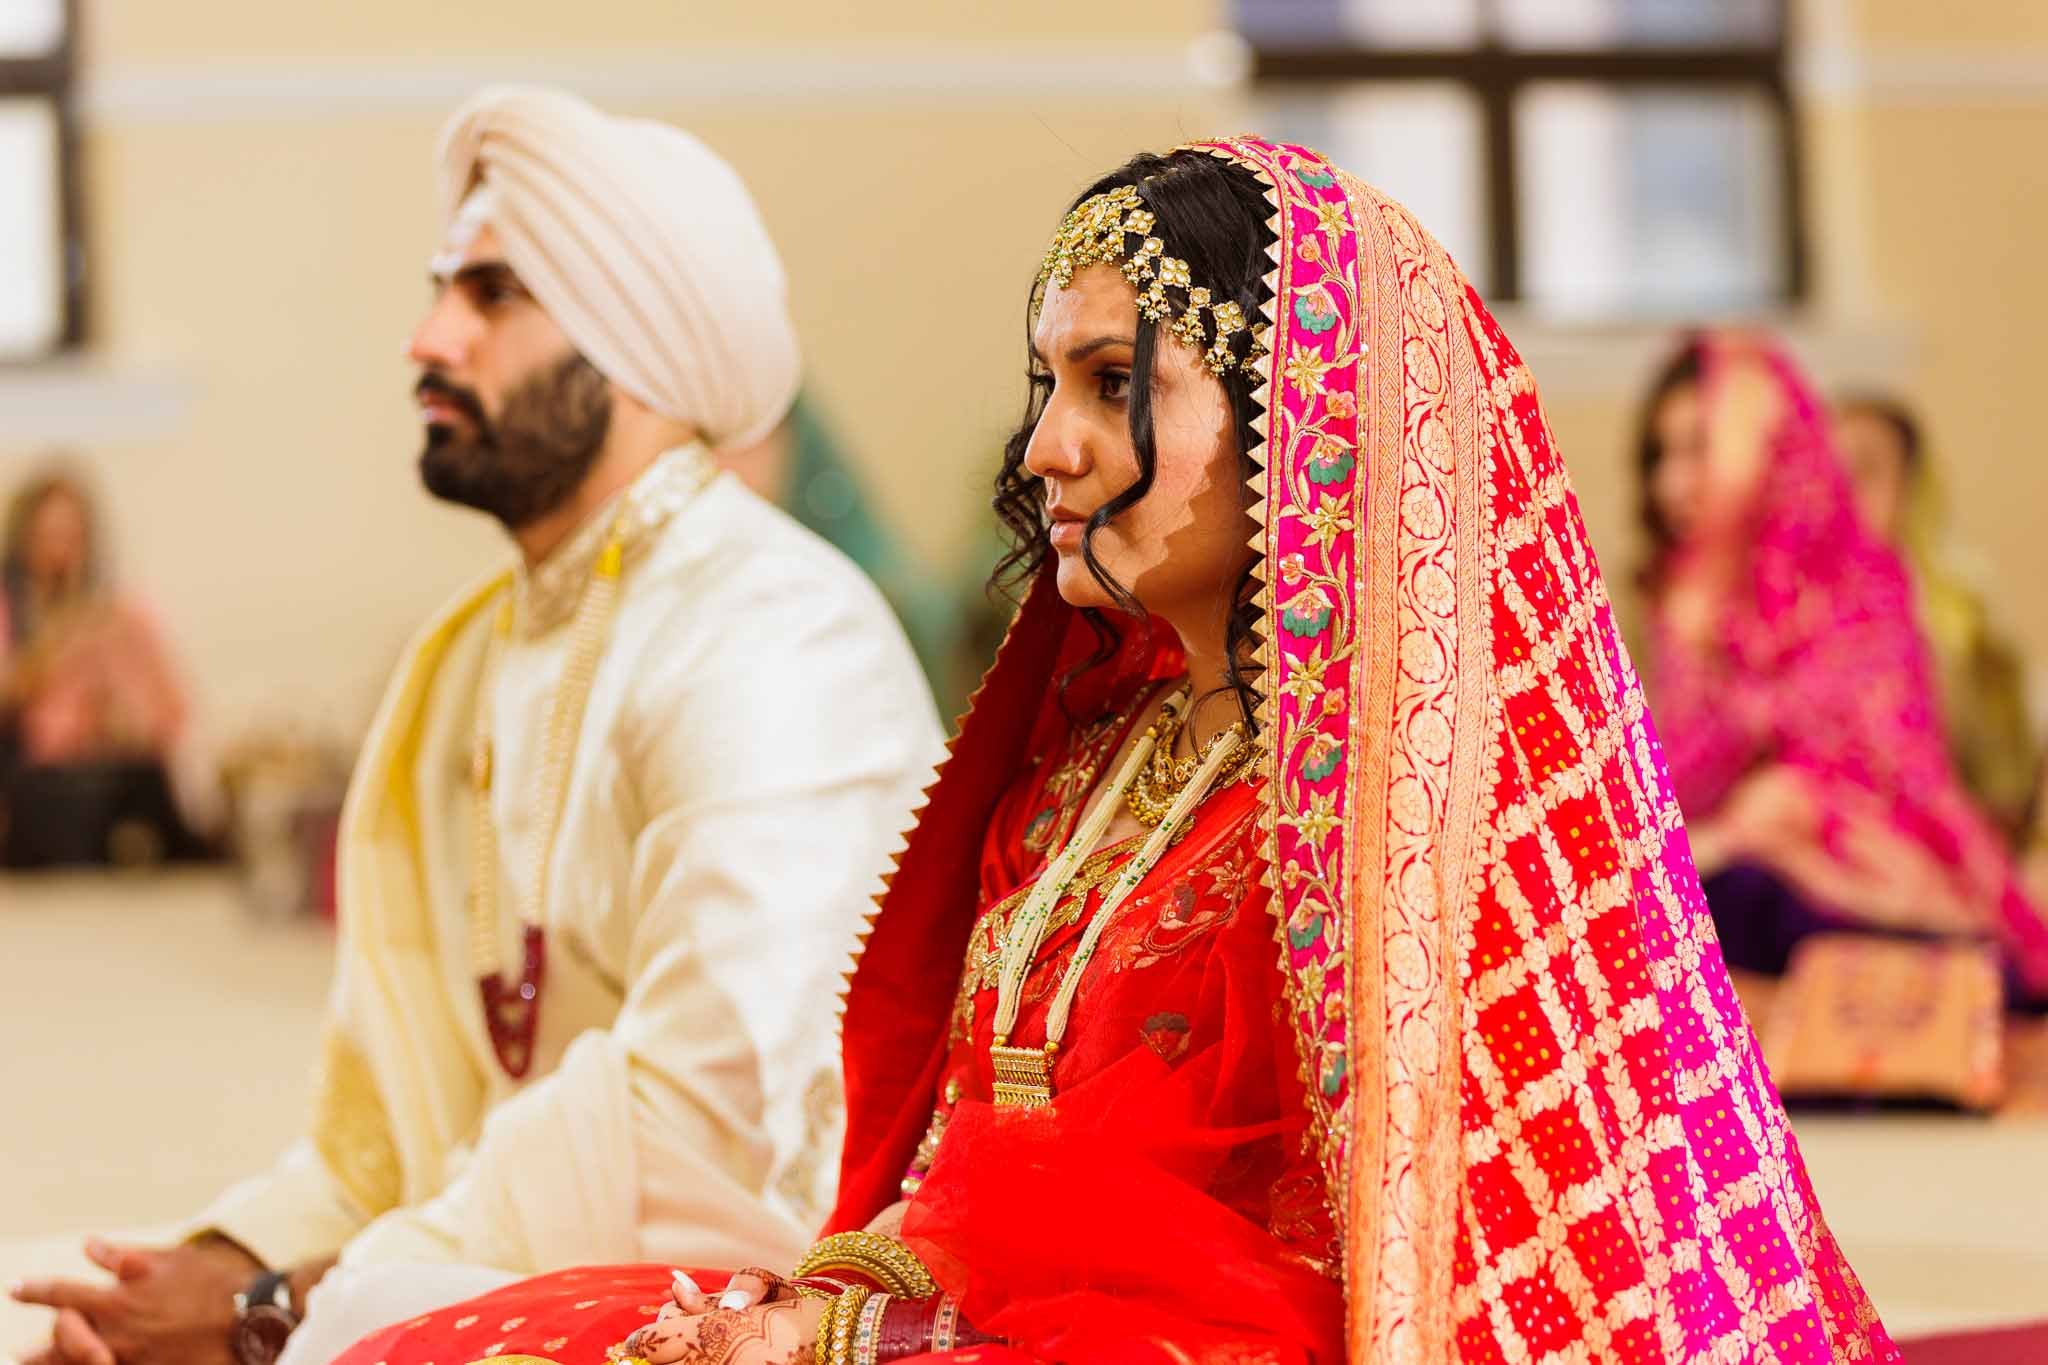 A Punjabi bride and groom getting married with traditional rituals in Gurudwara